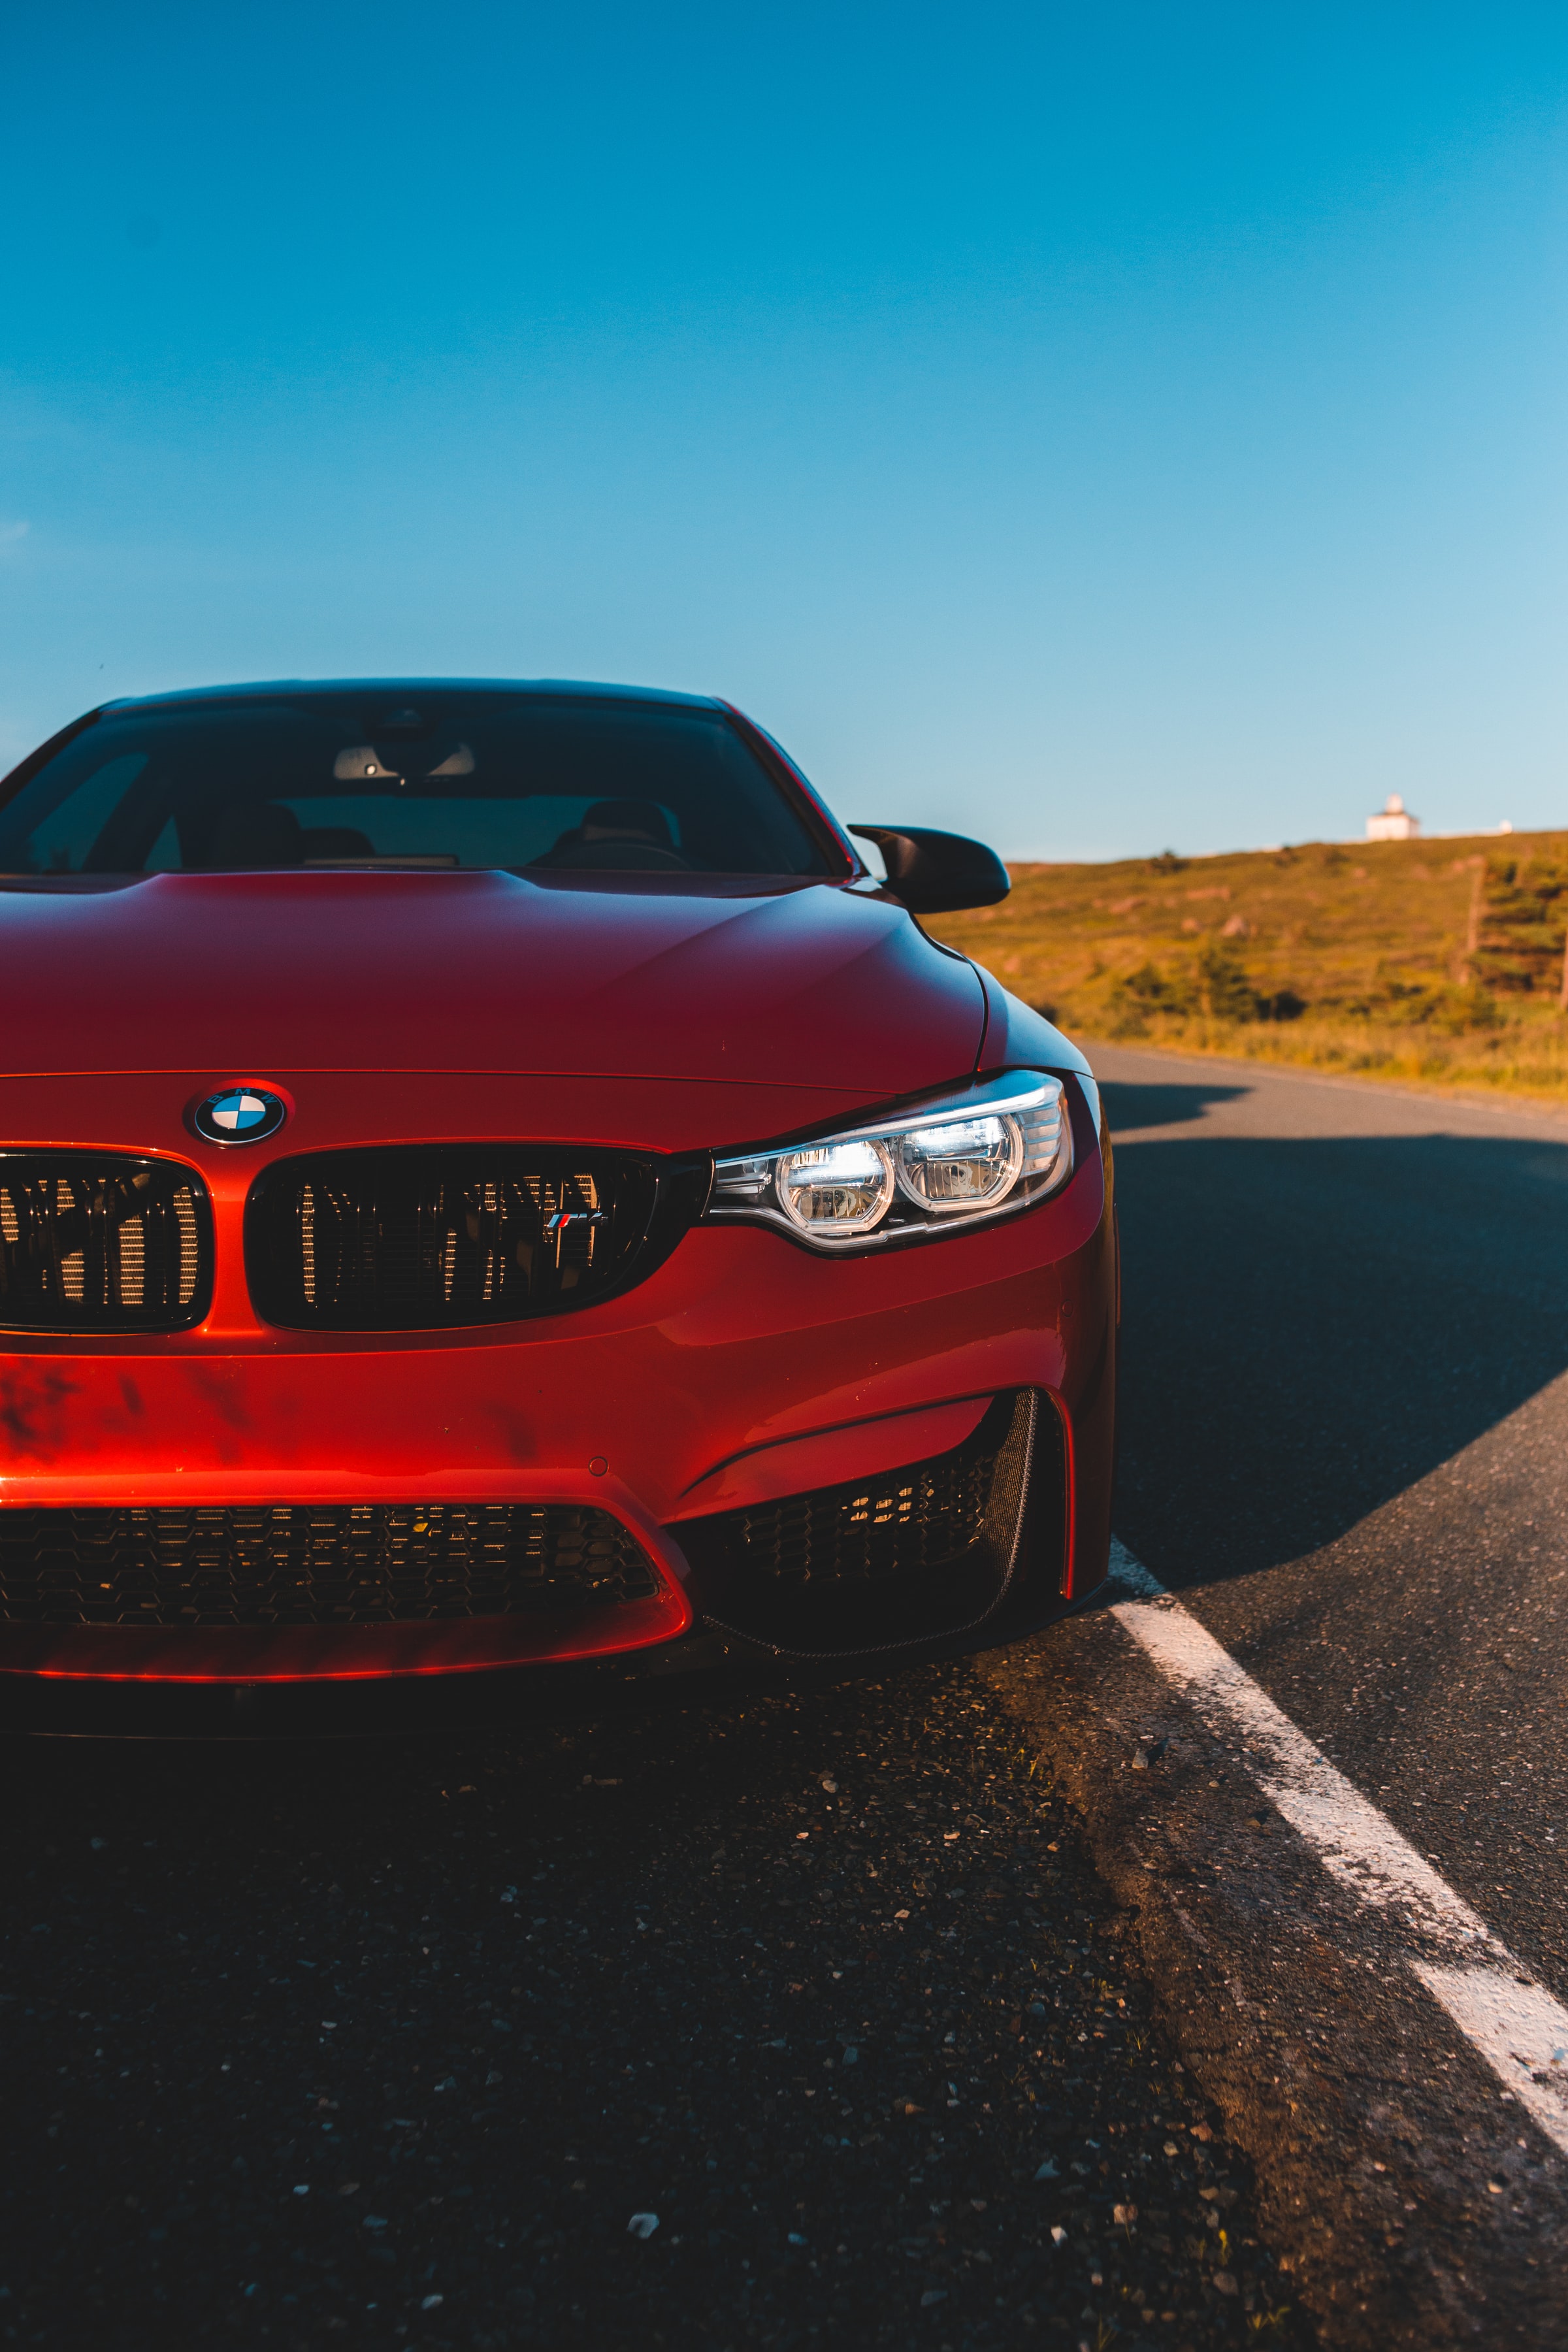 bmw, cars, red, car, front view, headlight, bmw m4